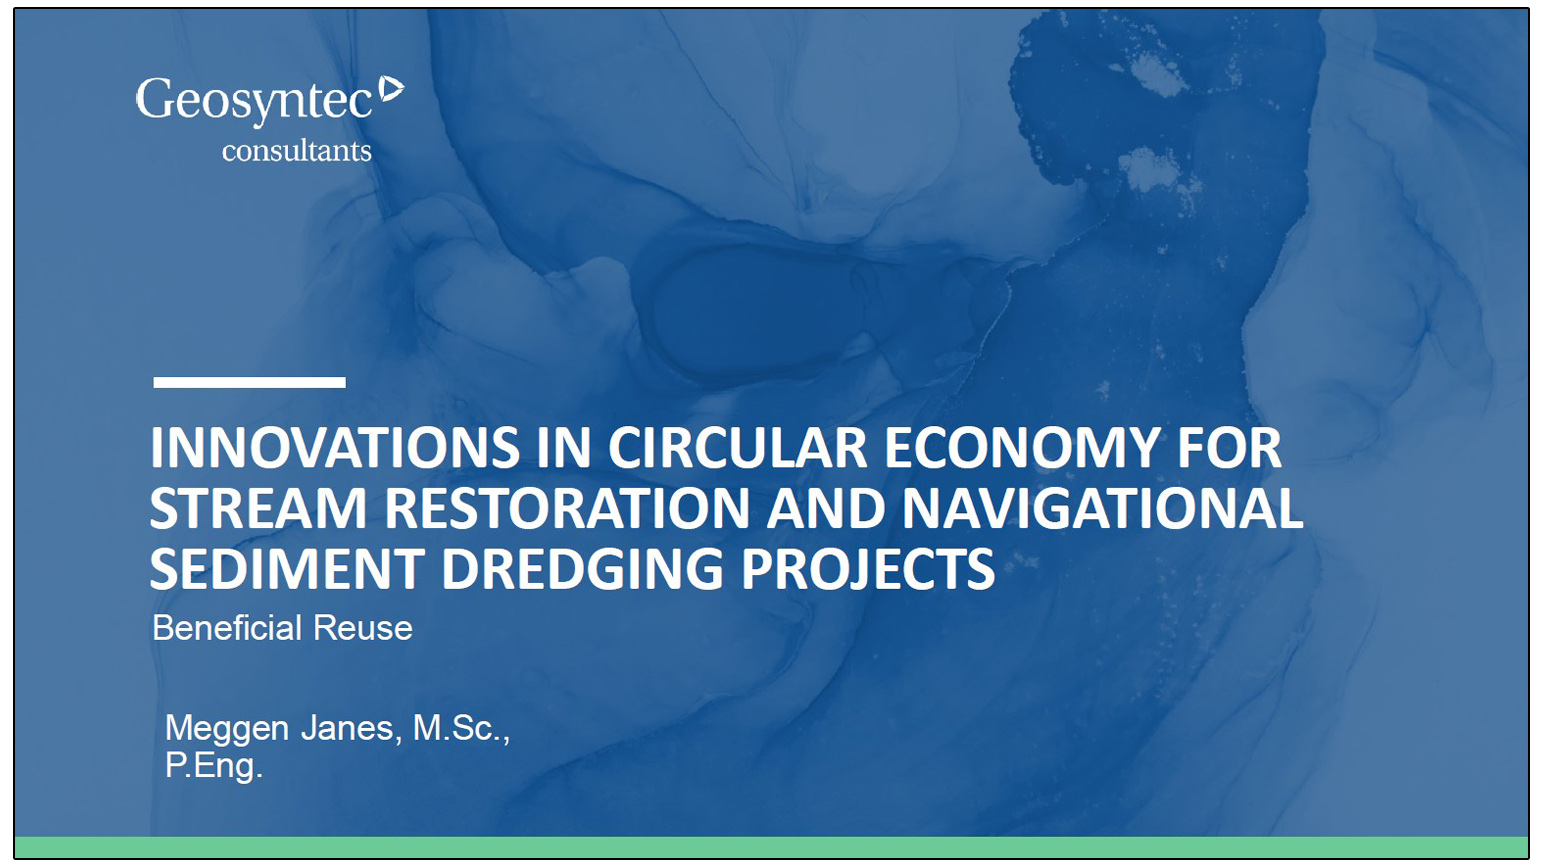 Innovations in Circular Economy for Stream Restoration and Navigational Sediment Dredging Projects - presentation by Meggen Janes